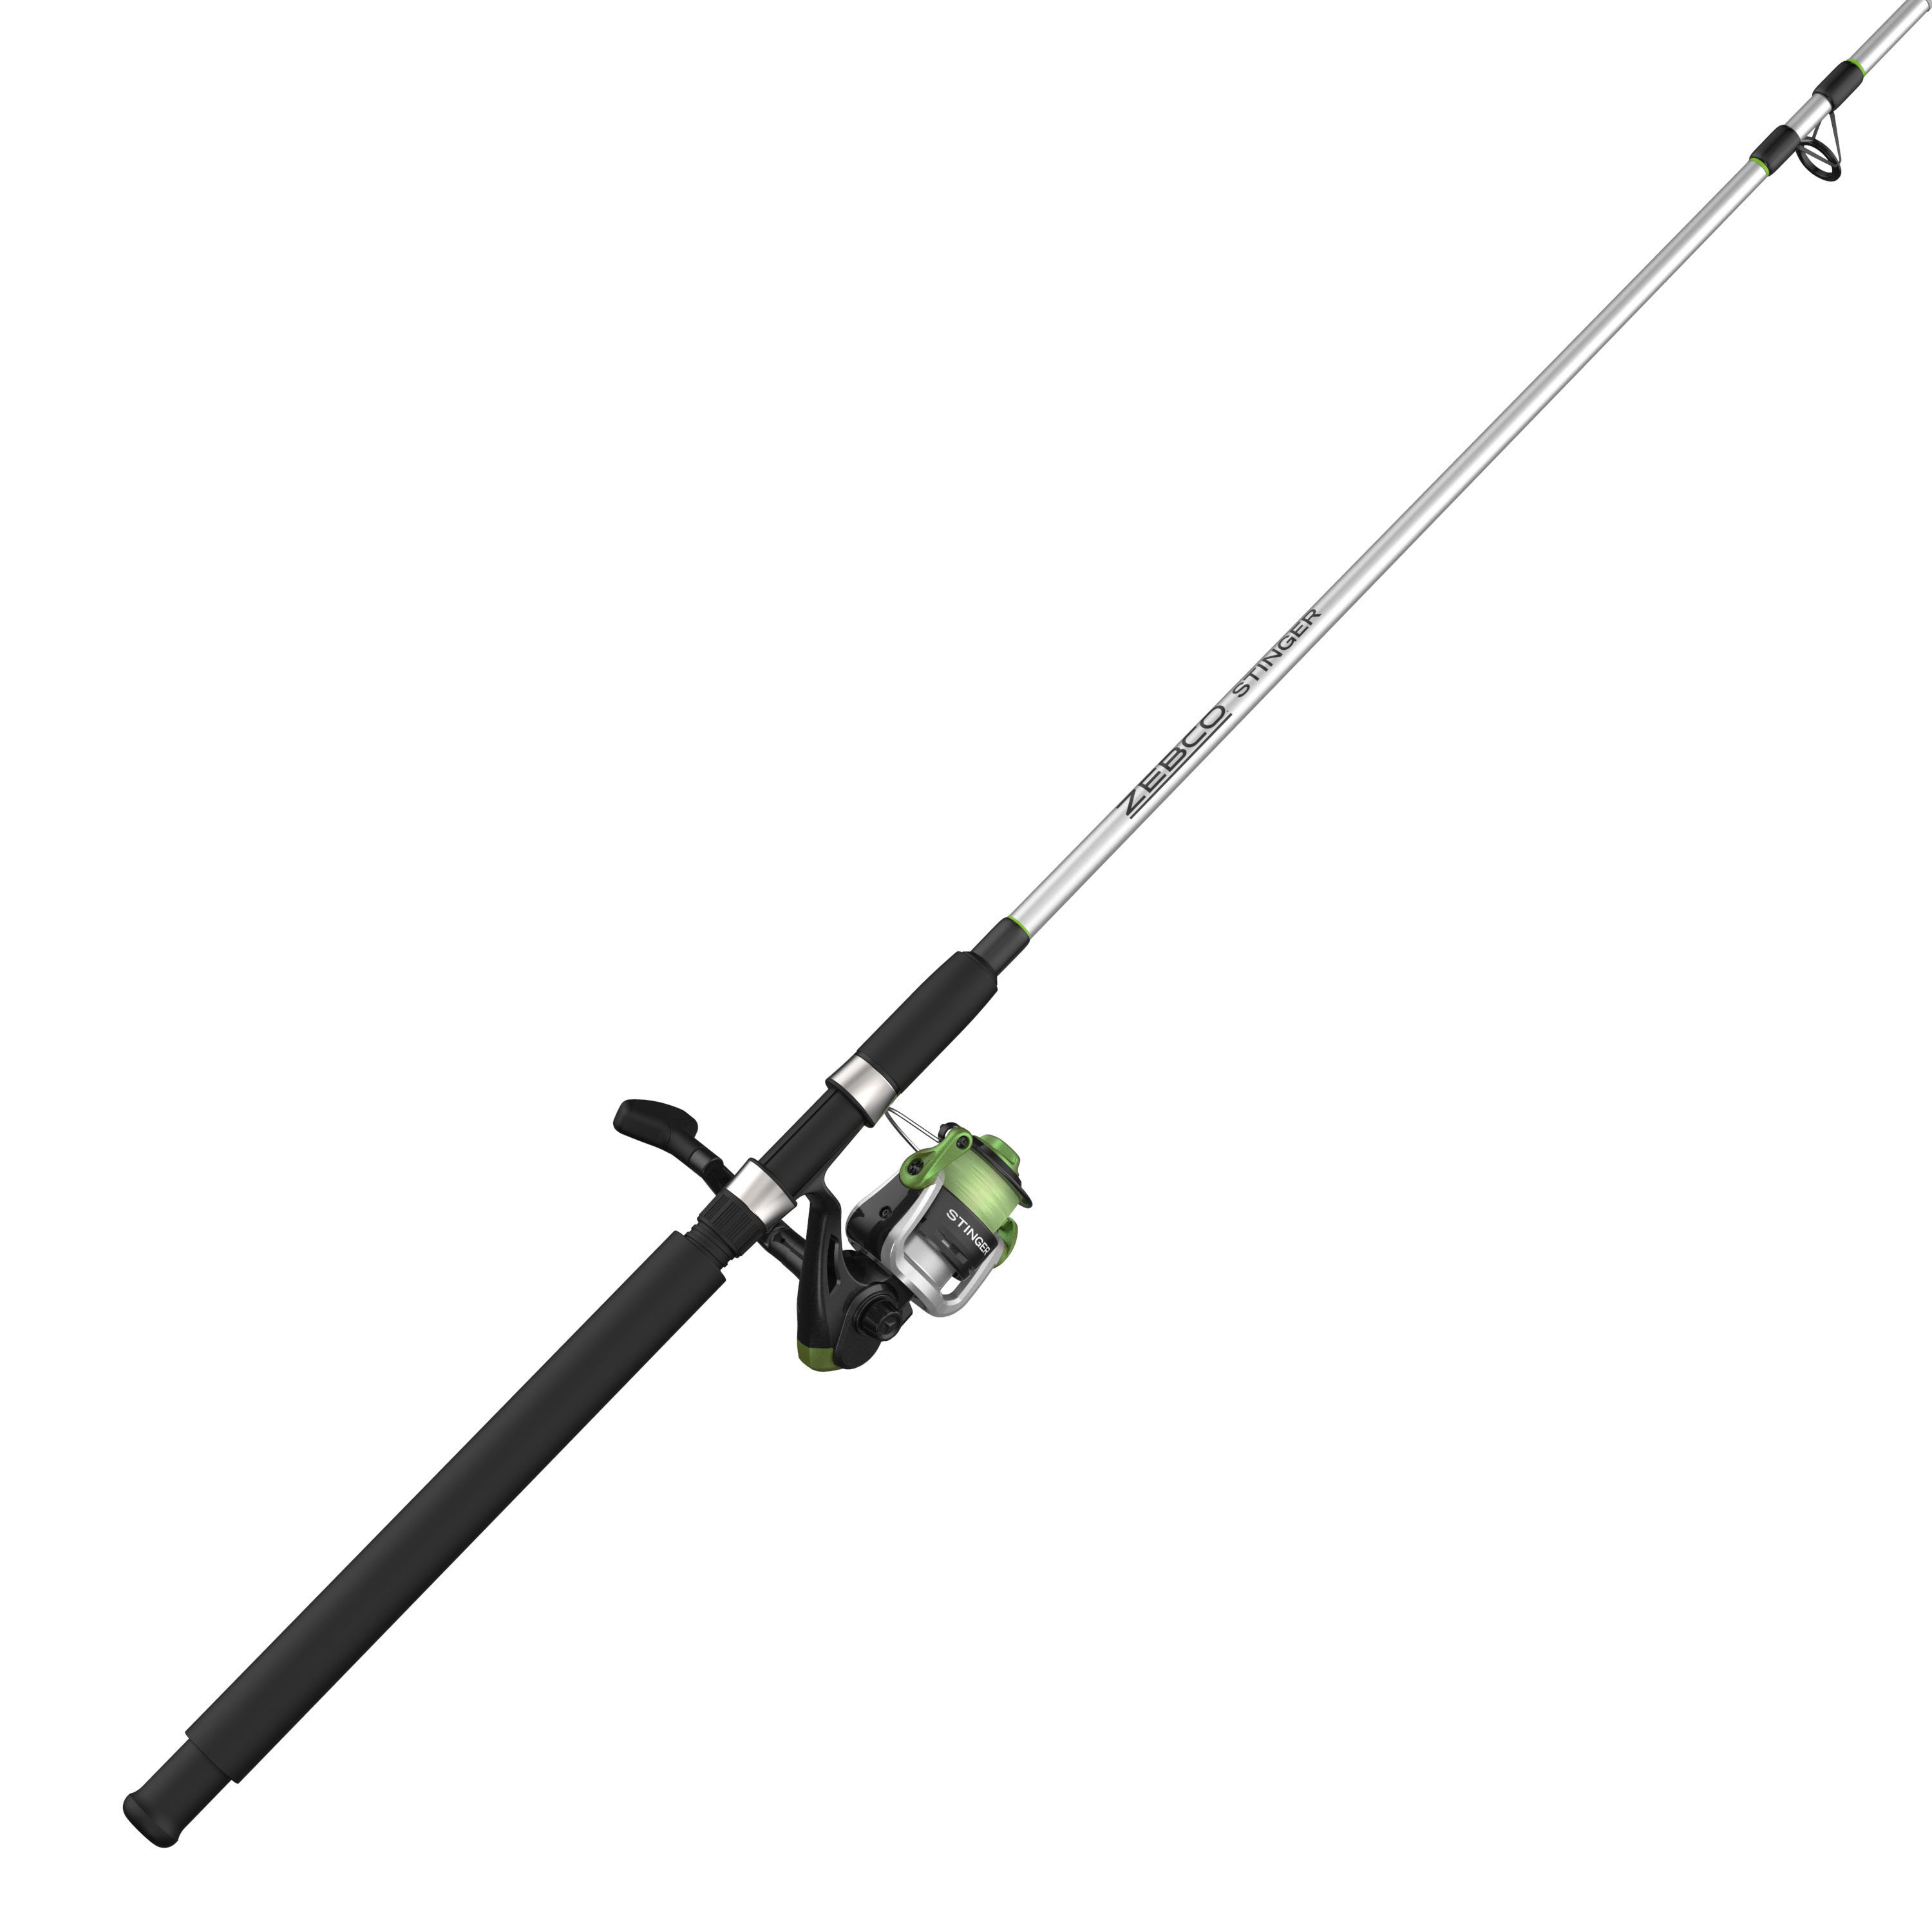 Zebco Sportfisher SP6070 Charcoal Series 7' 2-Piece Spinning Fishing Rod